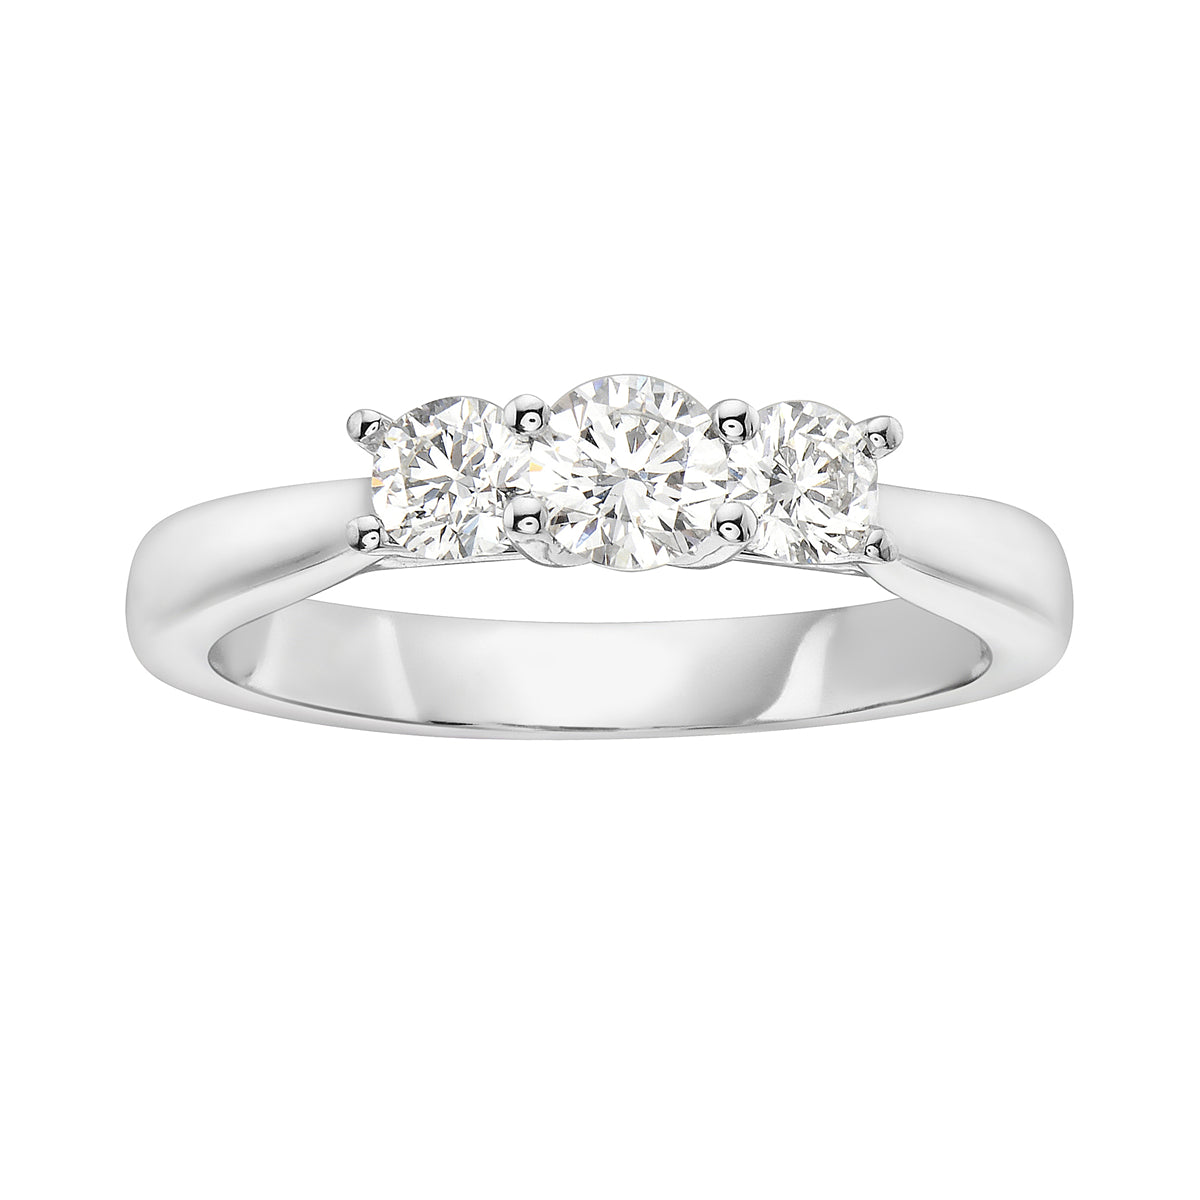 Ring 18KW/4.2G 1RD-0.28CT 2RD-0.36CT